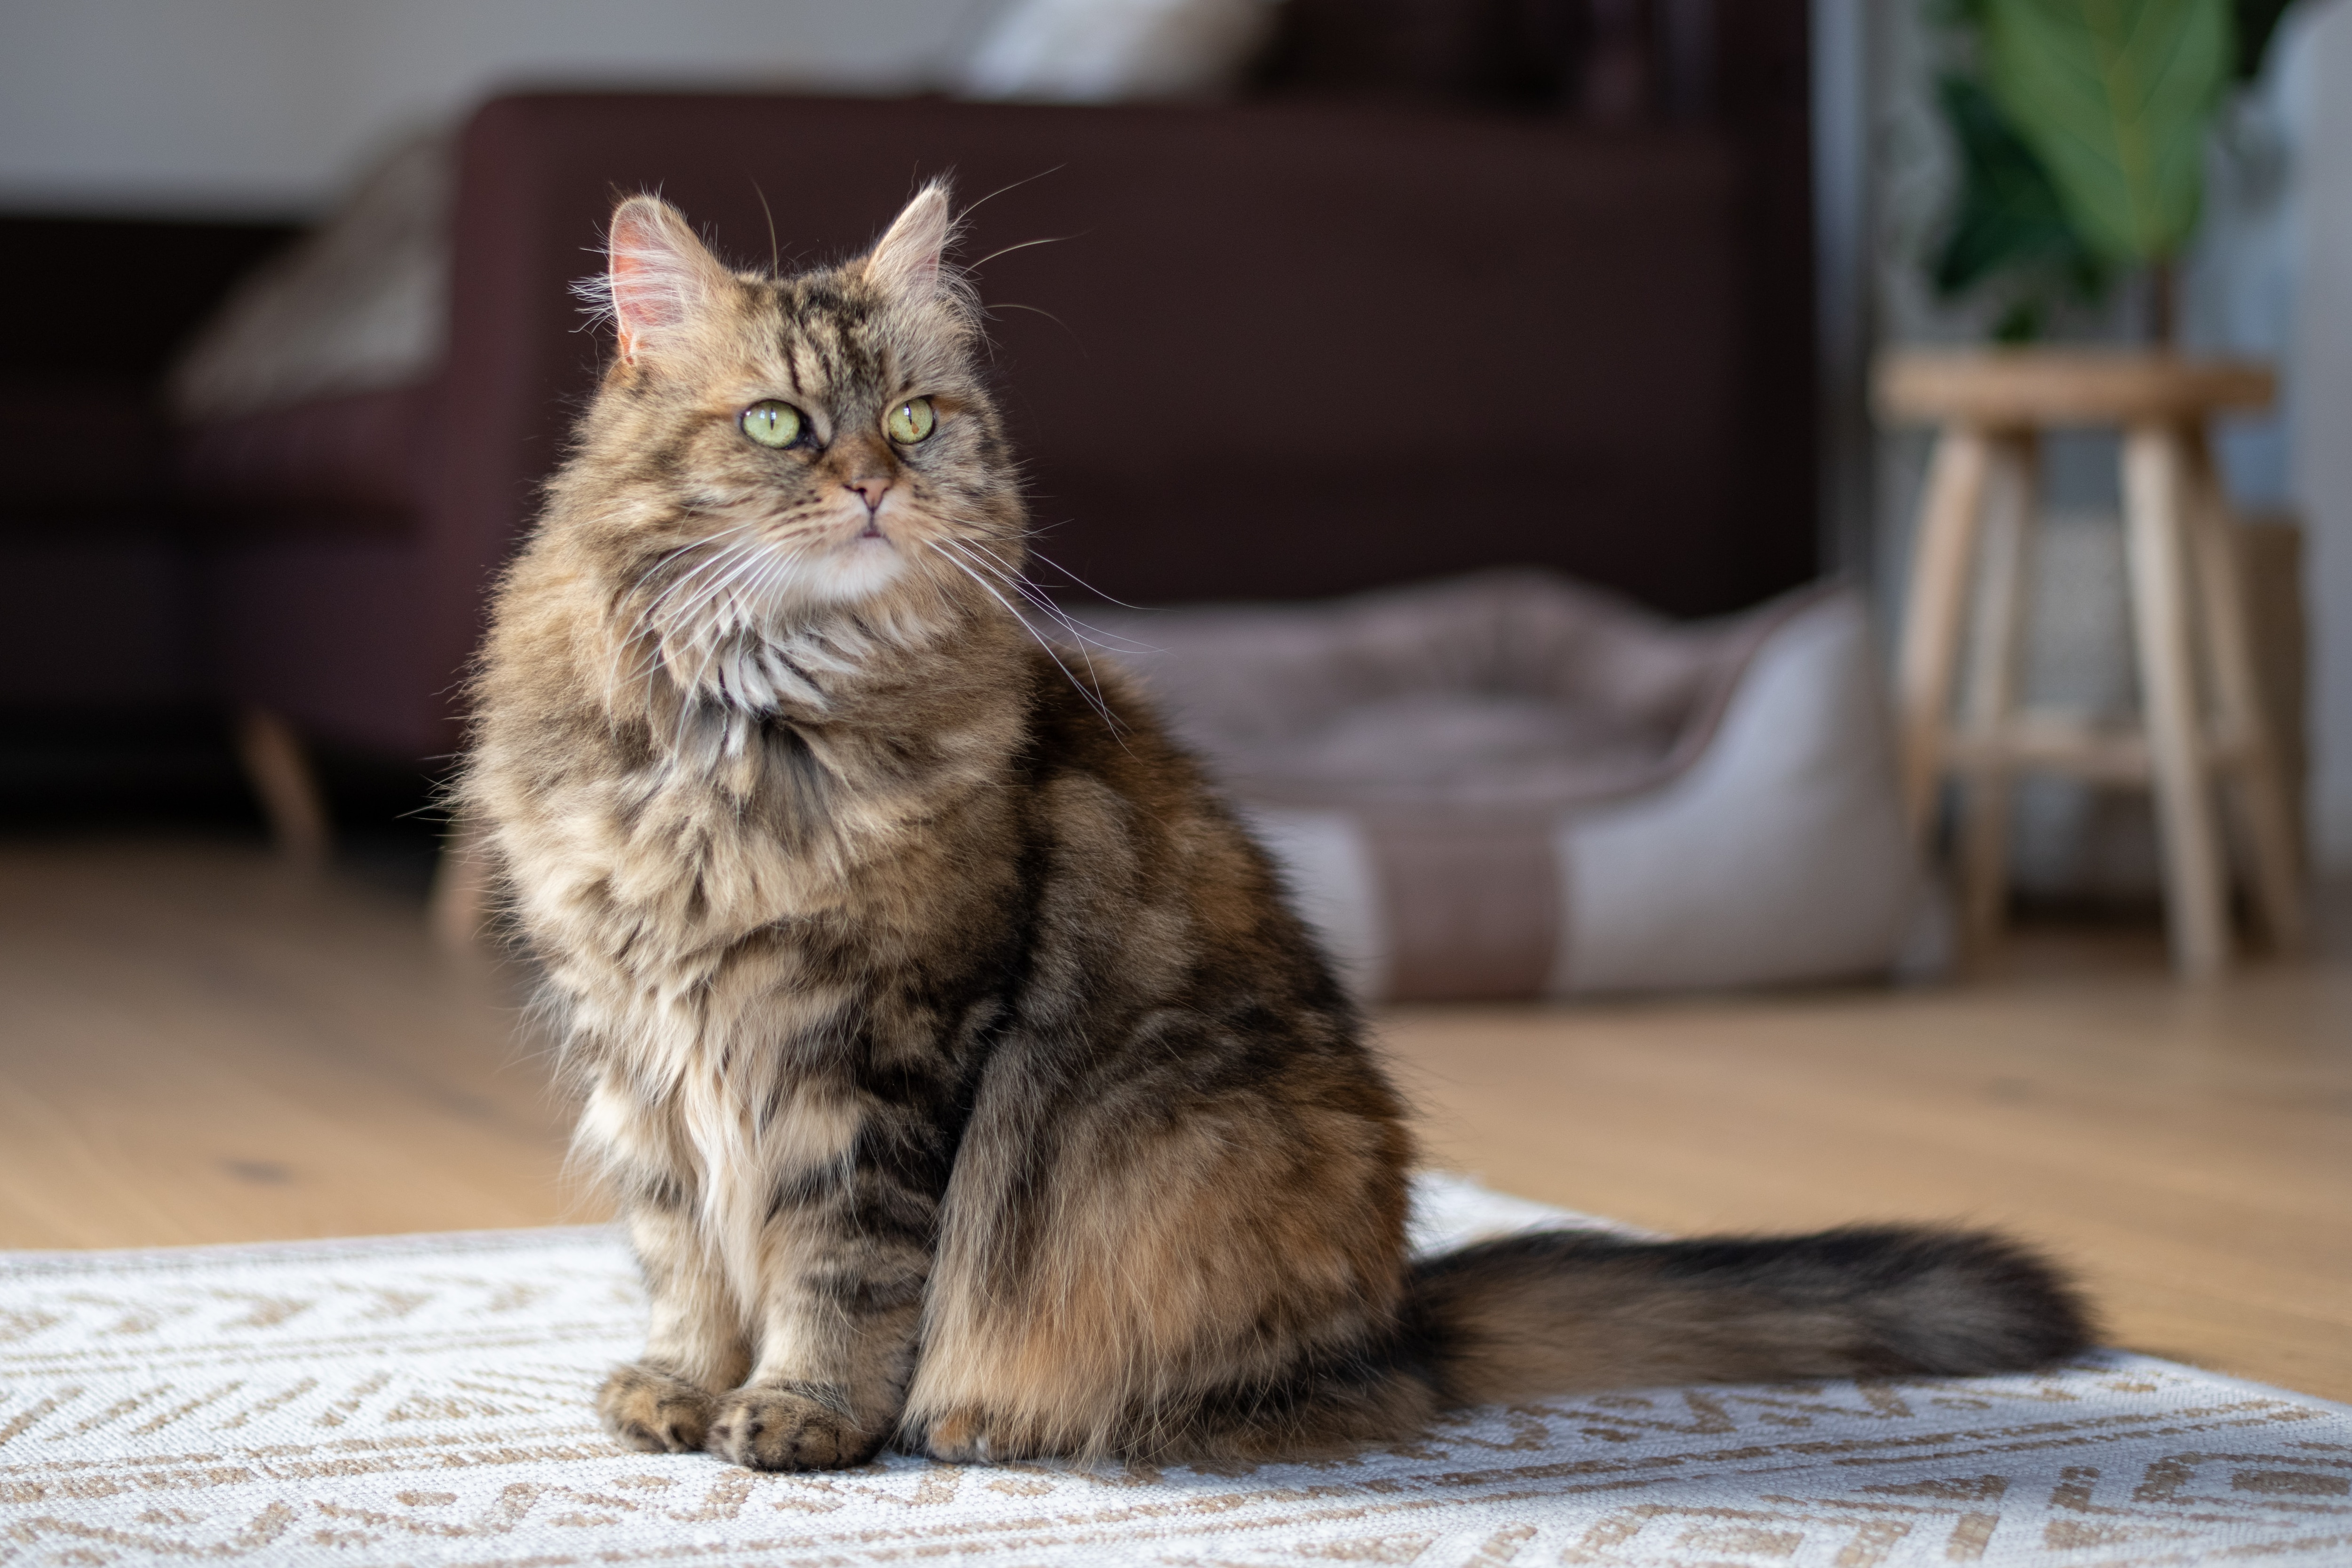 The Maine Coon is a breed of giant domestic cat with traits of a breed also known as the Gentle Giant.  (Unsplash)